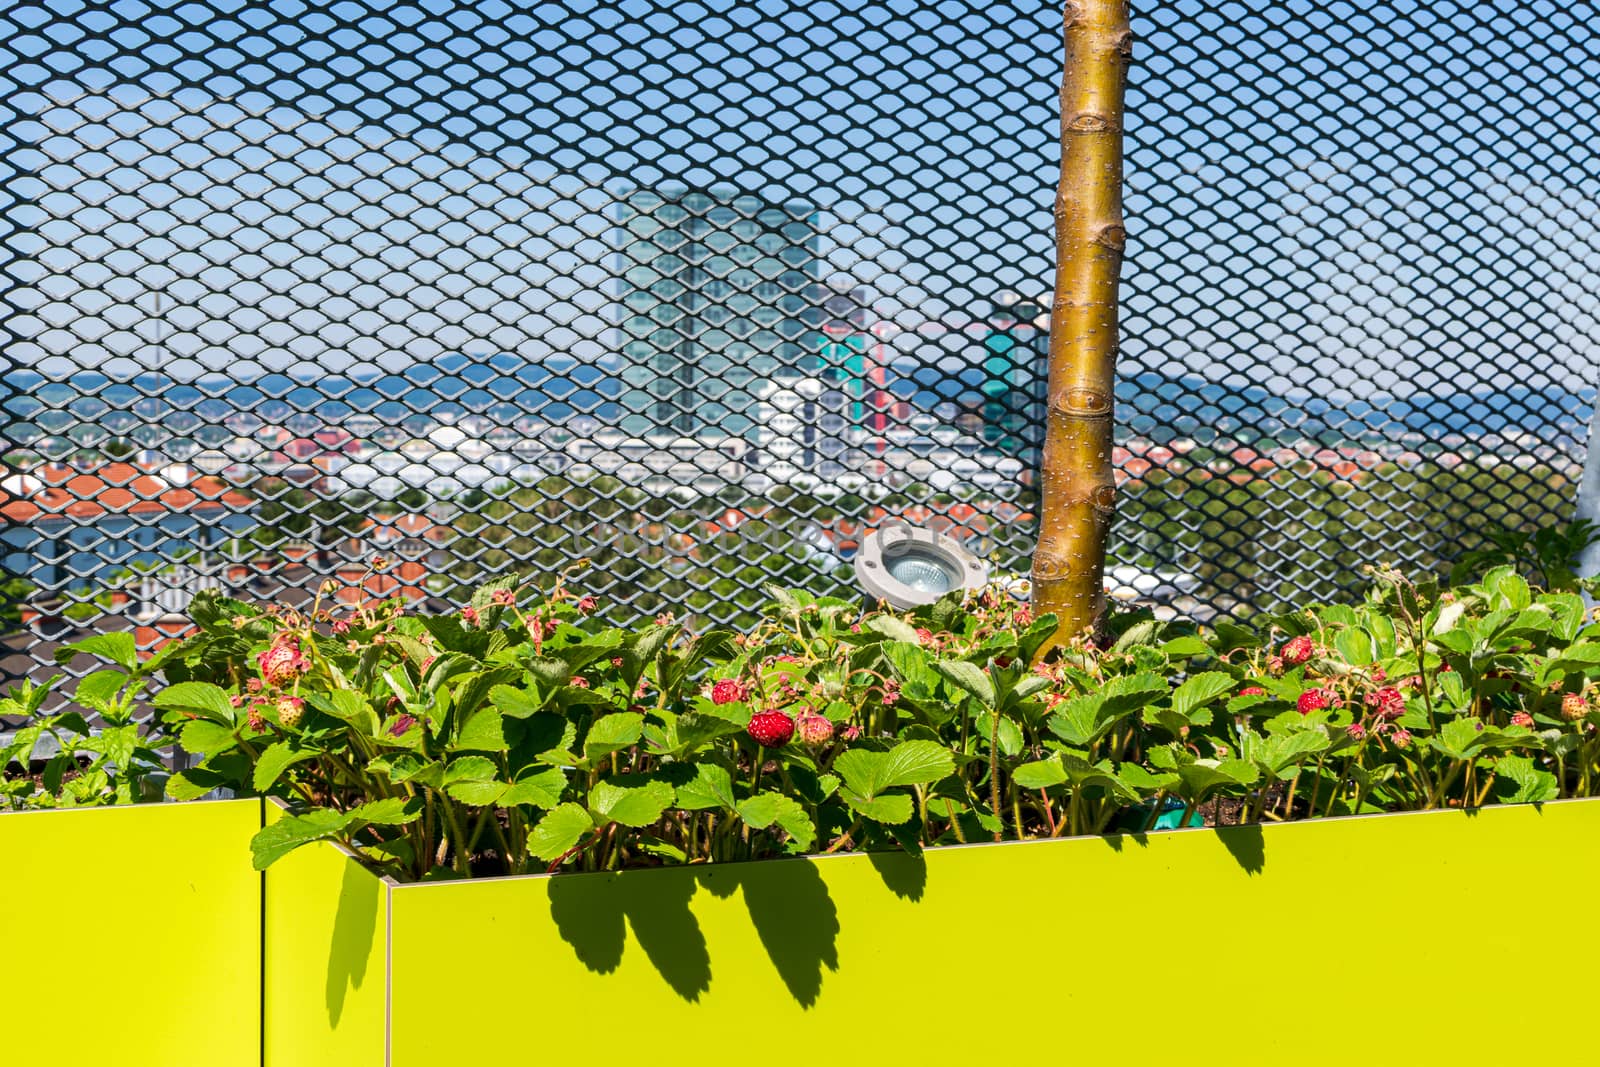 Green planter with an apple tree and strawberries with fruits in front of an expanded metal fence and high-rise buildings in the background by Umtsga